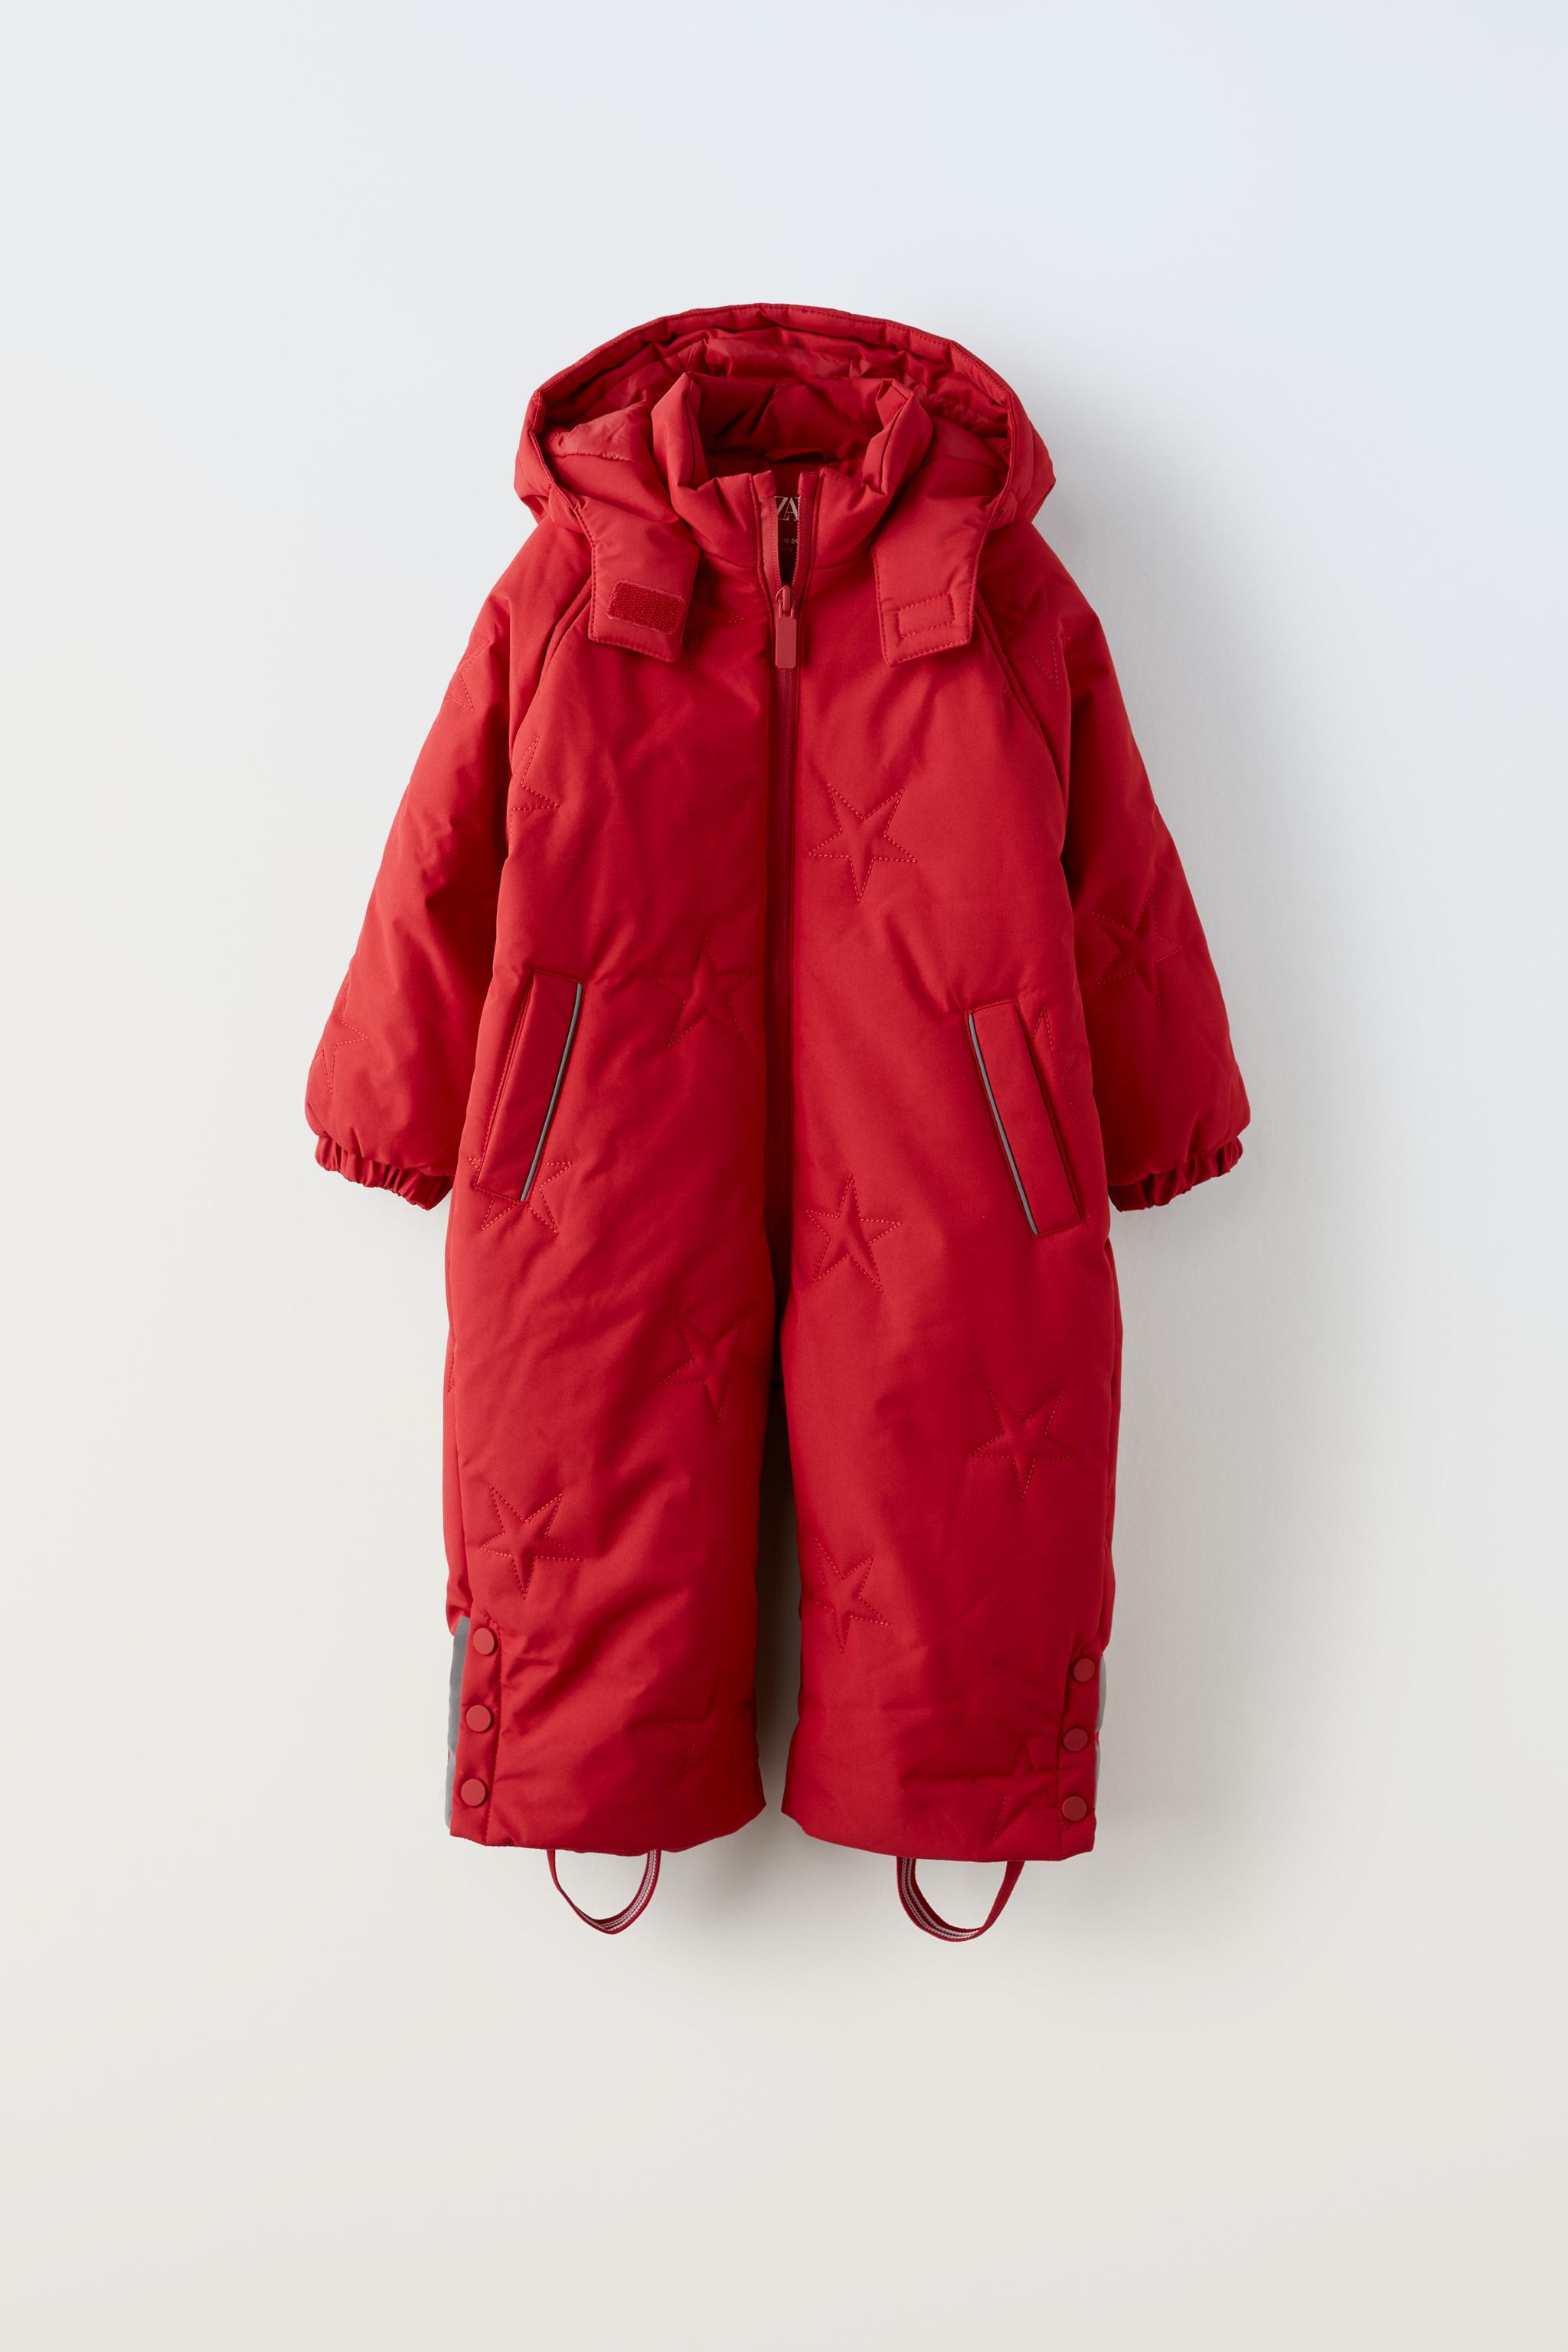 SKI COLLECTION キルティング WATER-REPELLENT AND WIND 